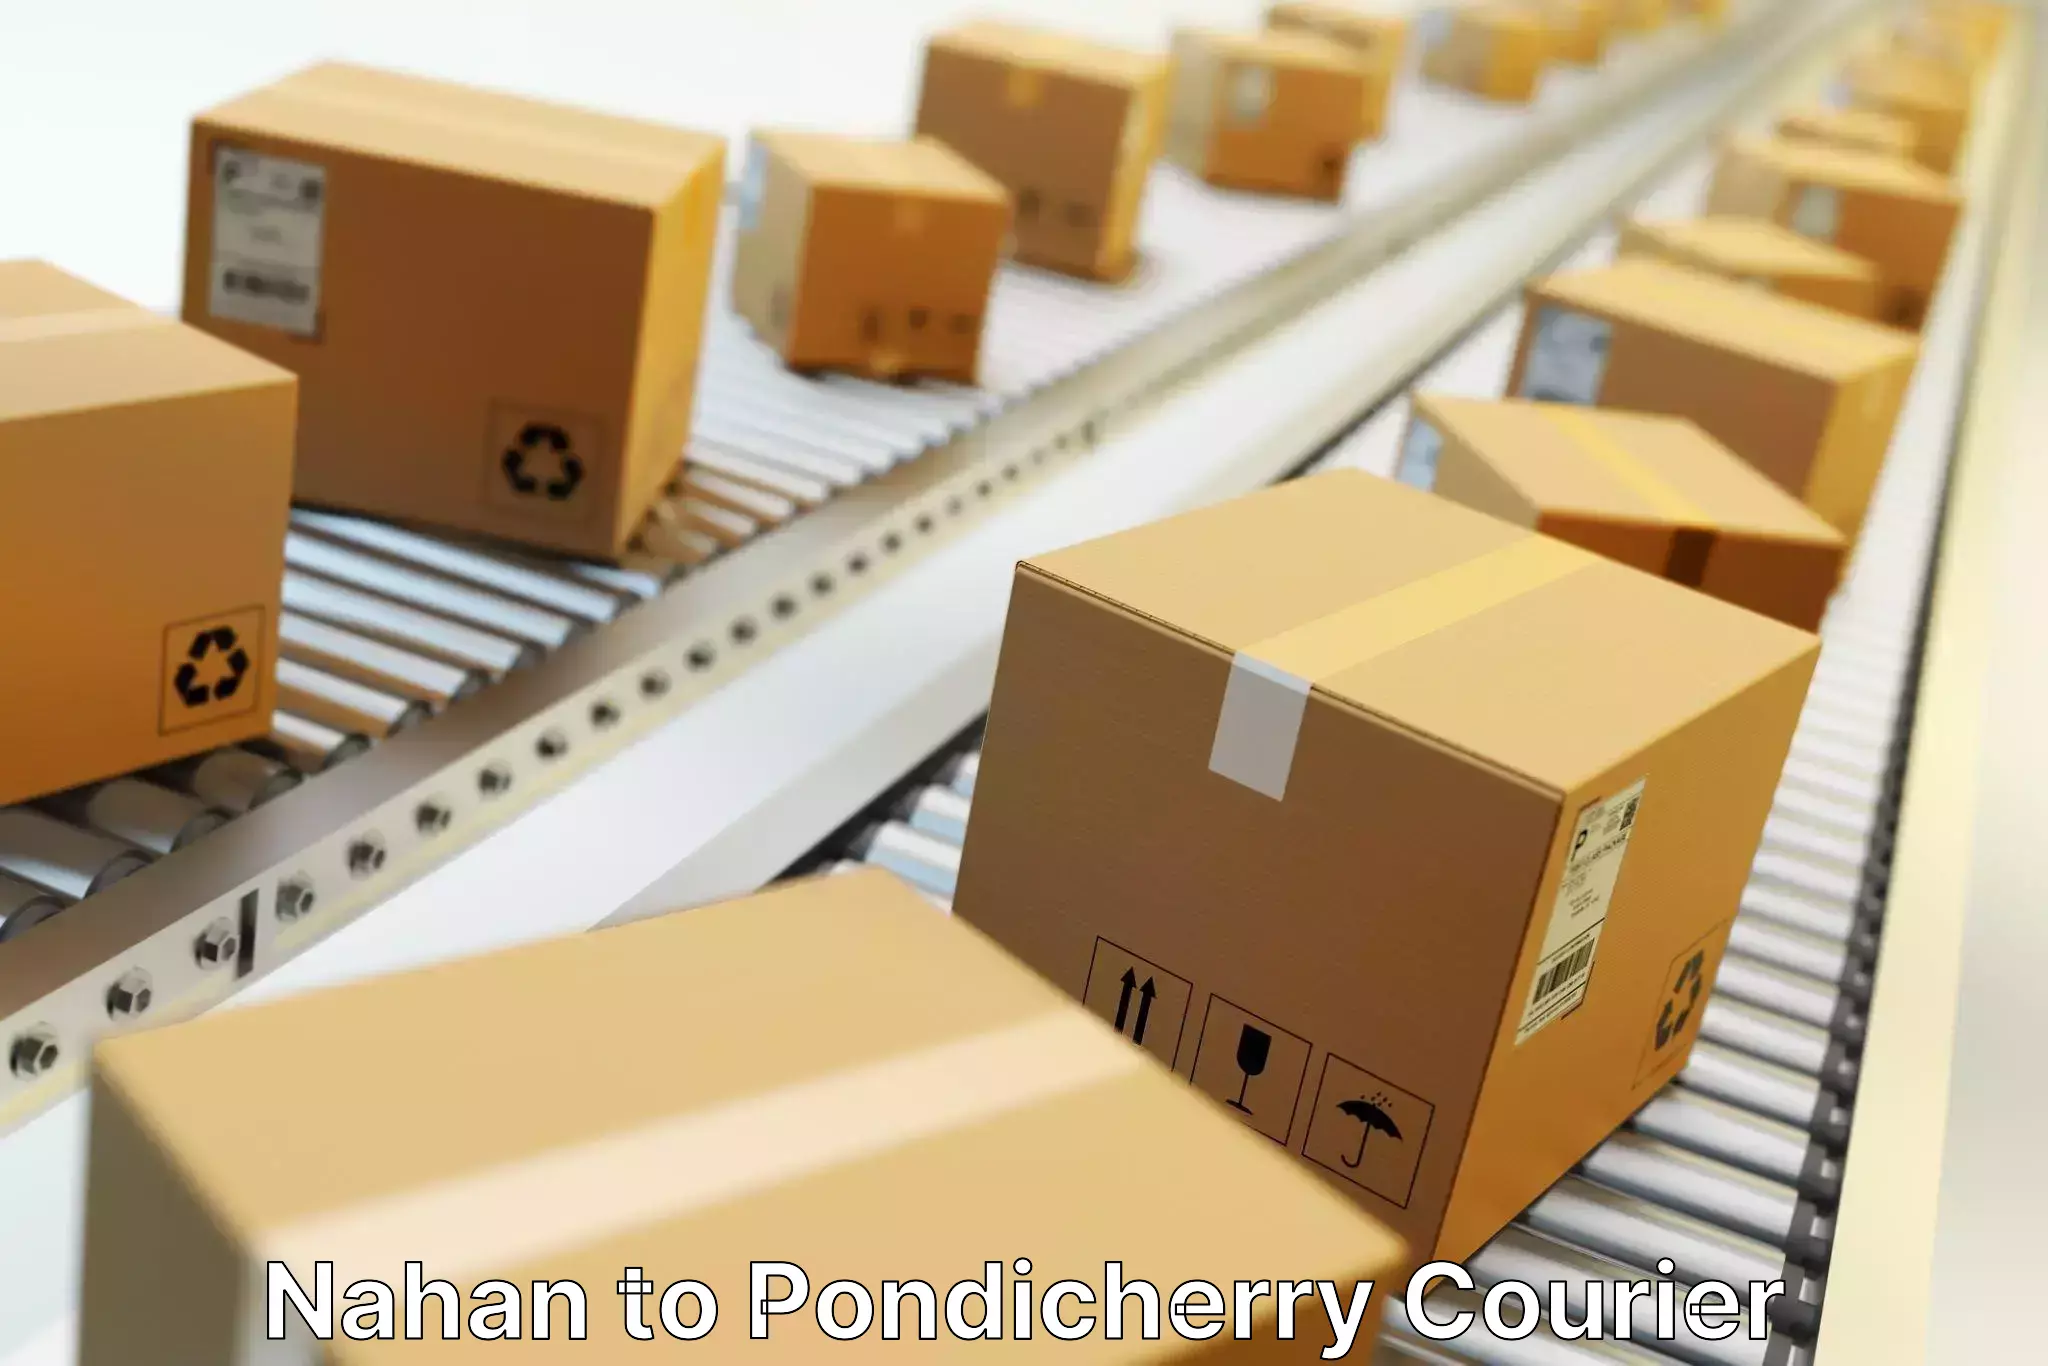 Express delivery network Nahan to Pondicherry University